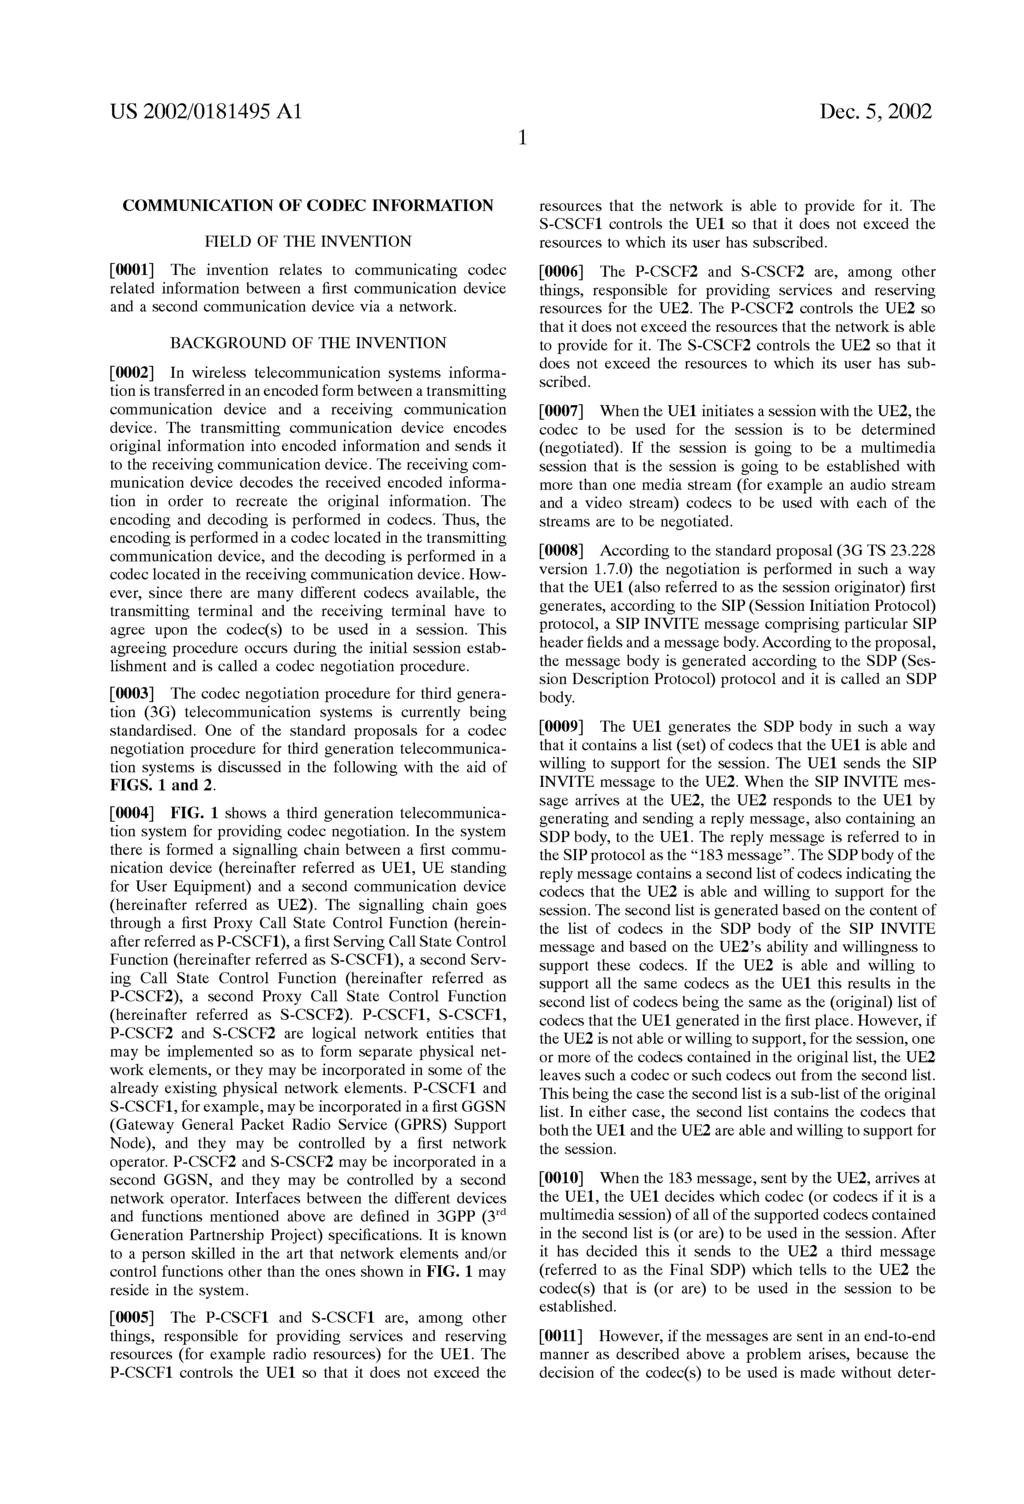 1 COMMUNICATION OF CODEC INFORMATION FIELD OF THE INVENTION [0001] The invention relates to communicating codec related information between a first communication device and a second communication